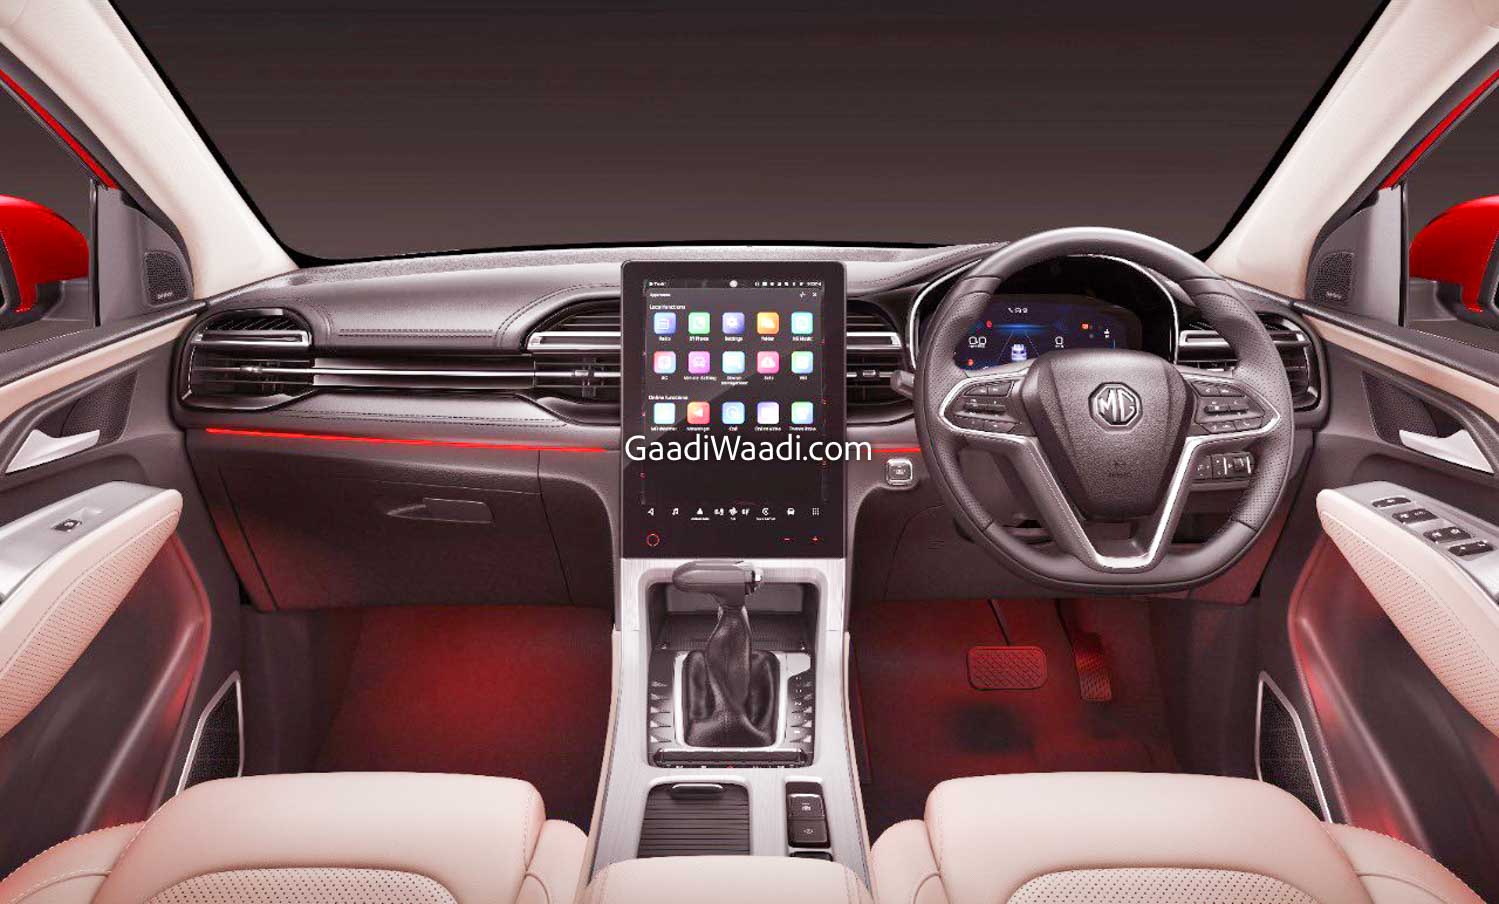 2022 MG Hector Facelift Interior Revealed Ahead Of Launch